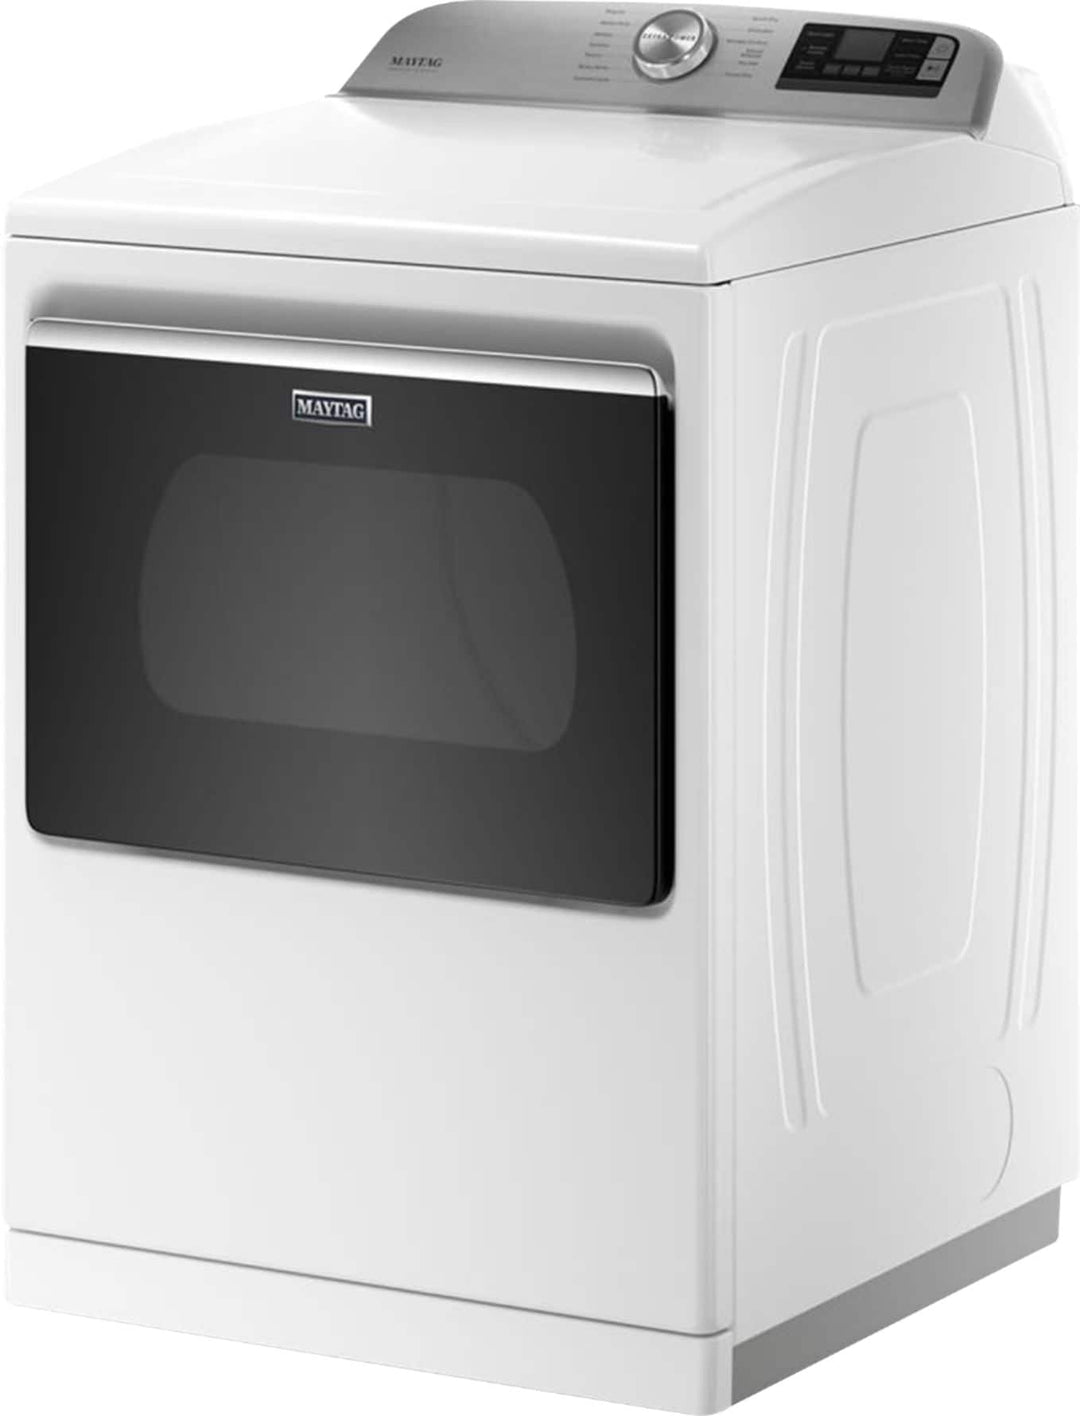 Maytag - 7.4 Cu. Ft. Smart Electric Dryer with Steam and Extra Power Button - White_5